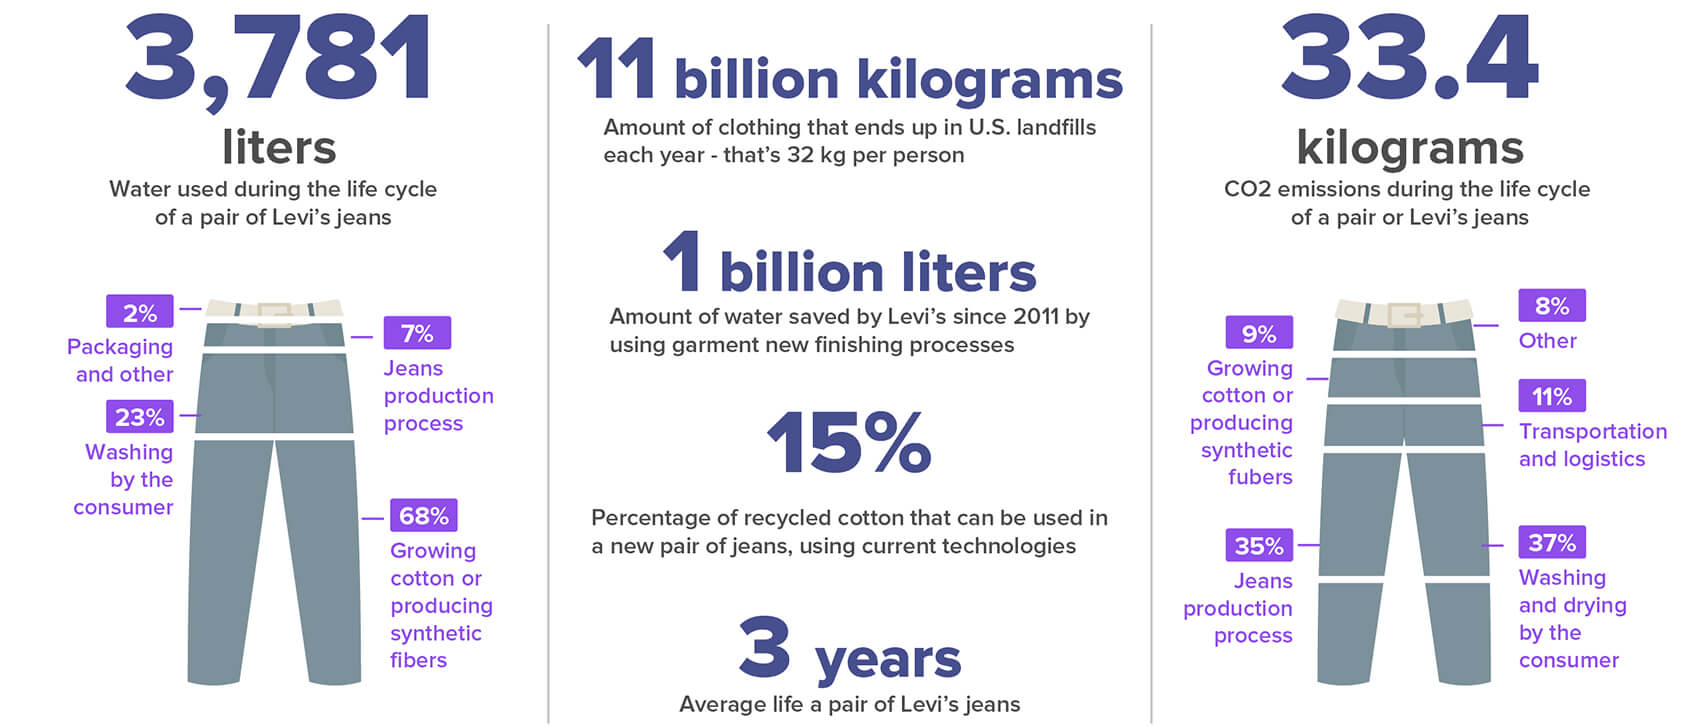 Fashion industry pollution and CO2 emissions graphic